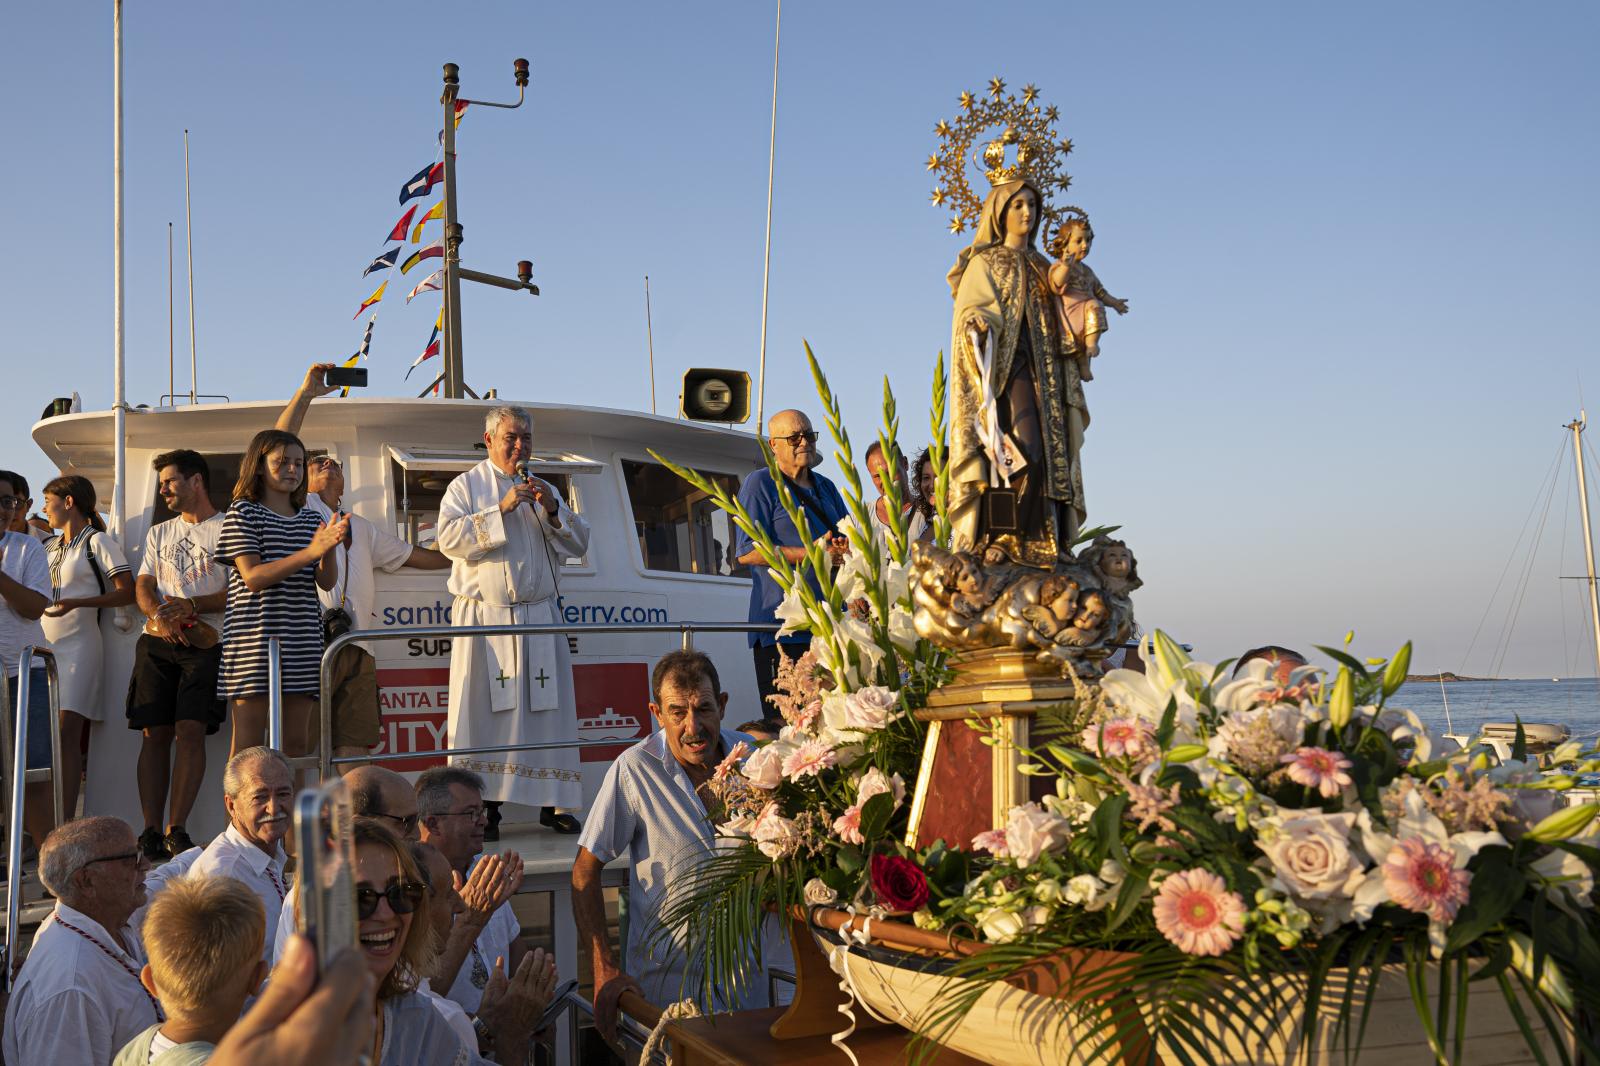 Image from Daily News - Pilgrims on their way to Santa Eulària's port...